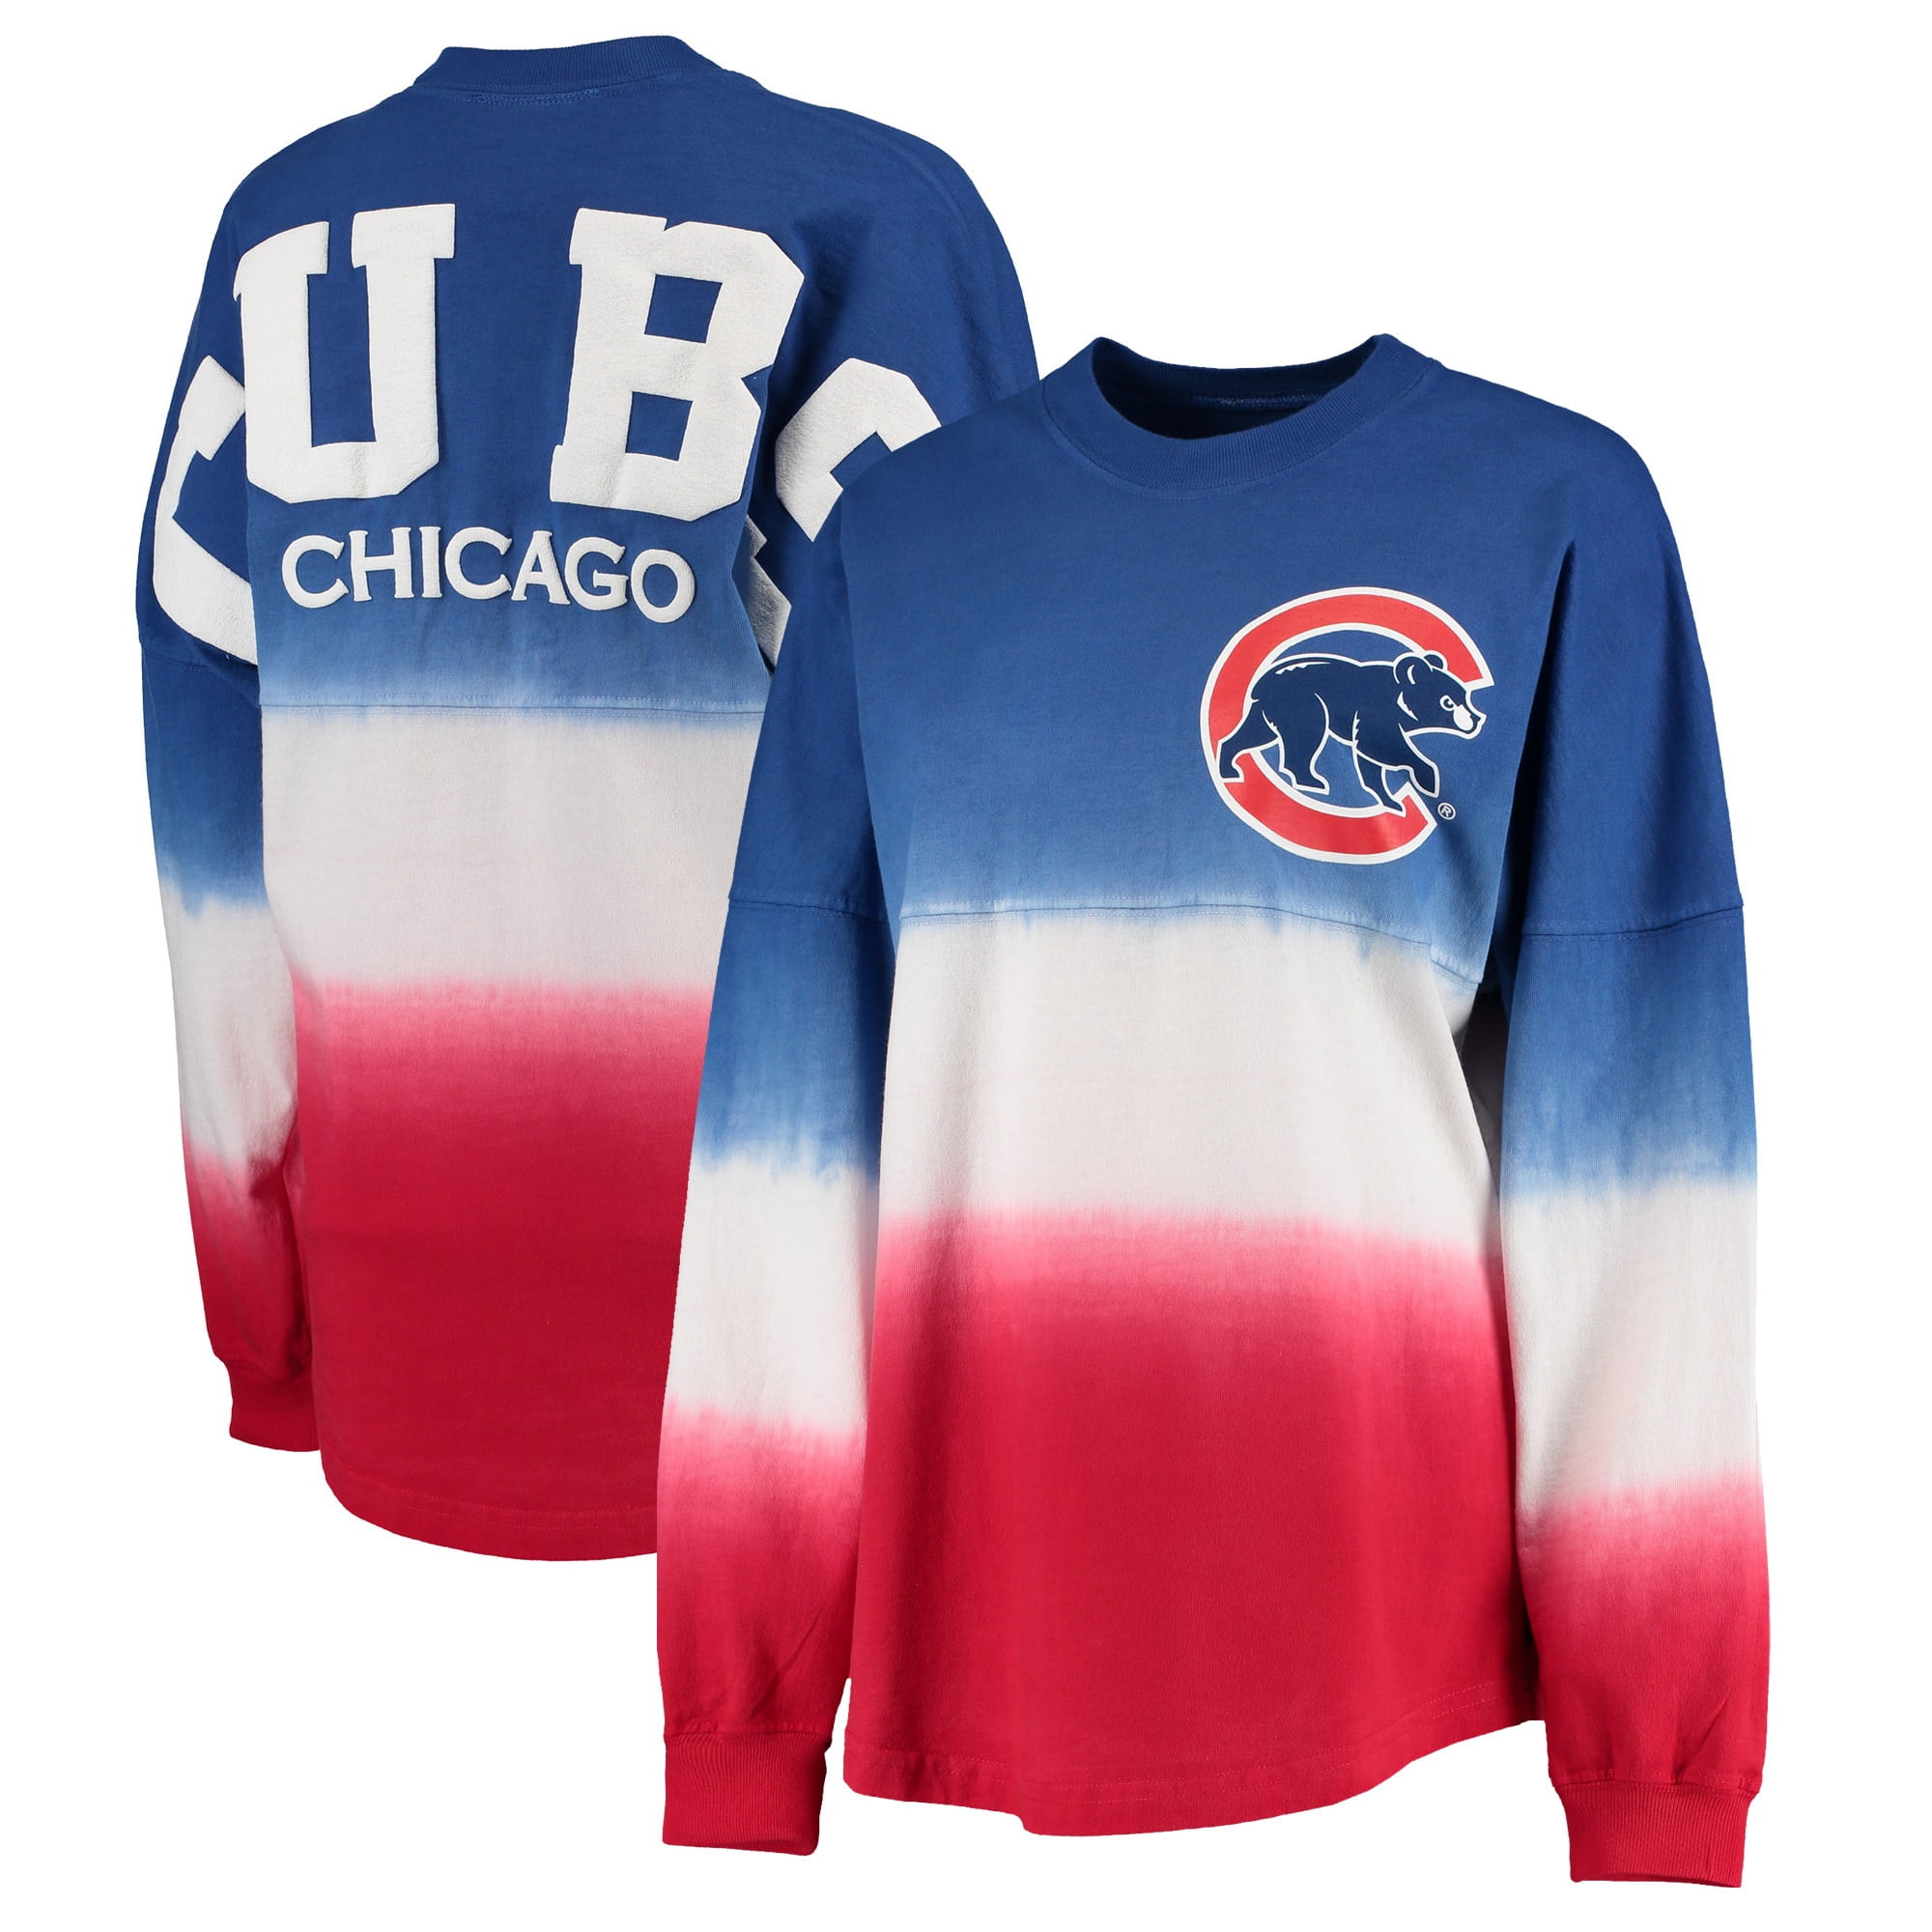 womens chicago cubs jersey